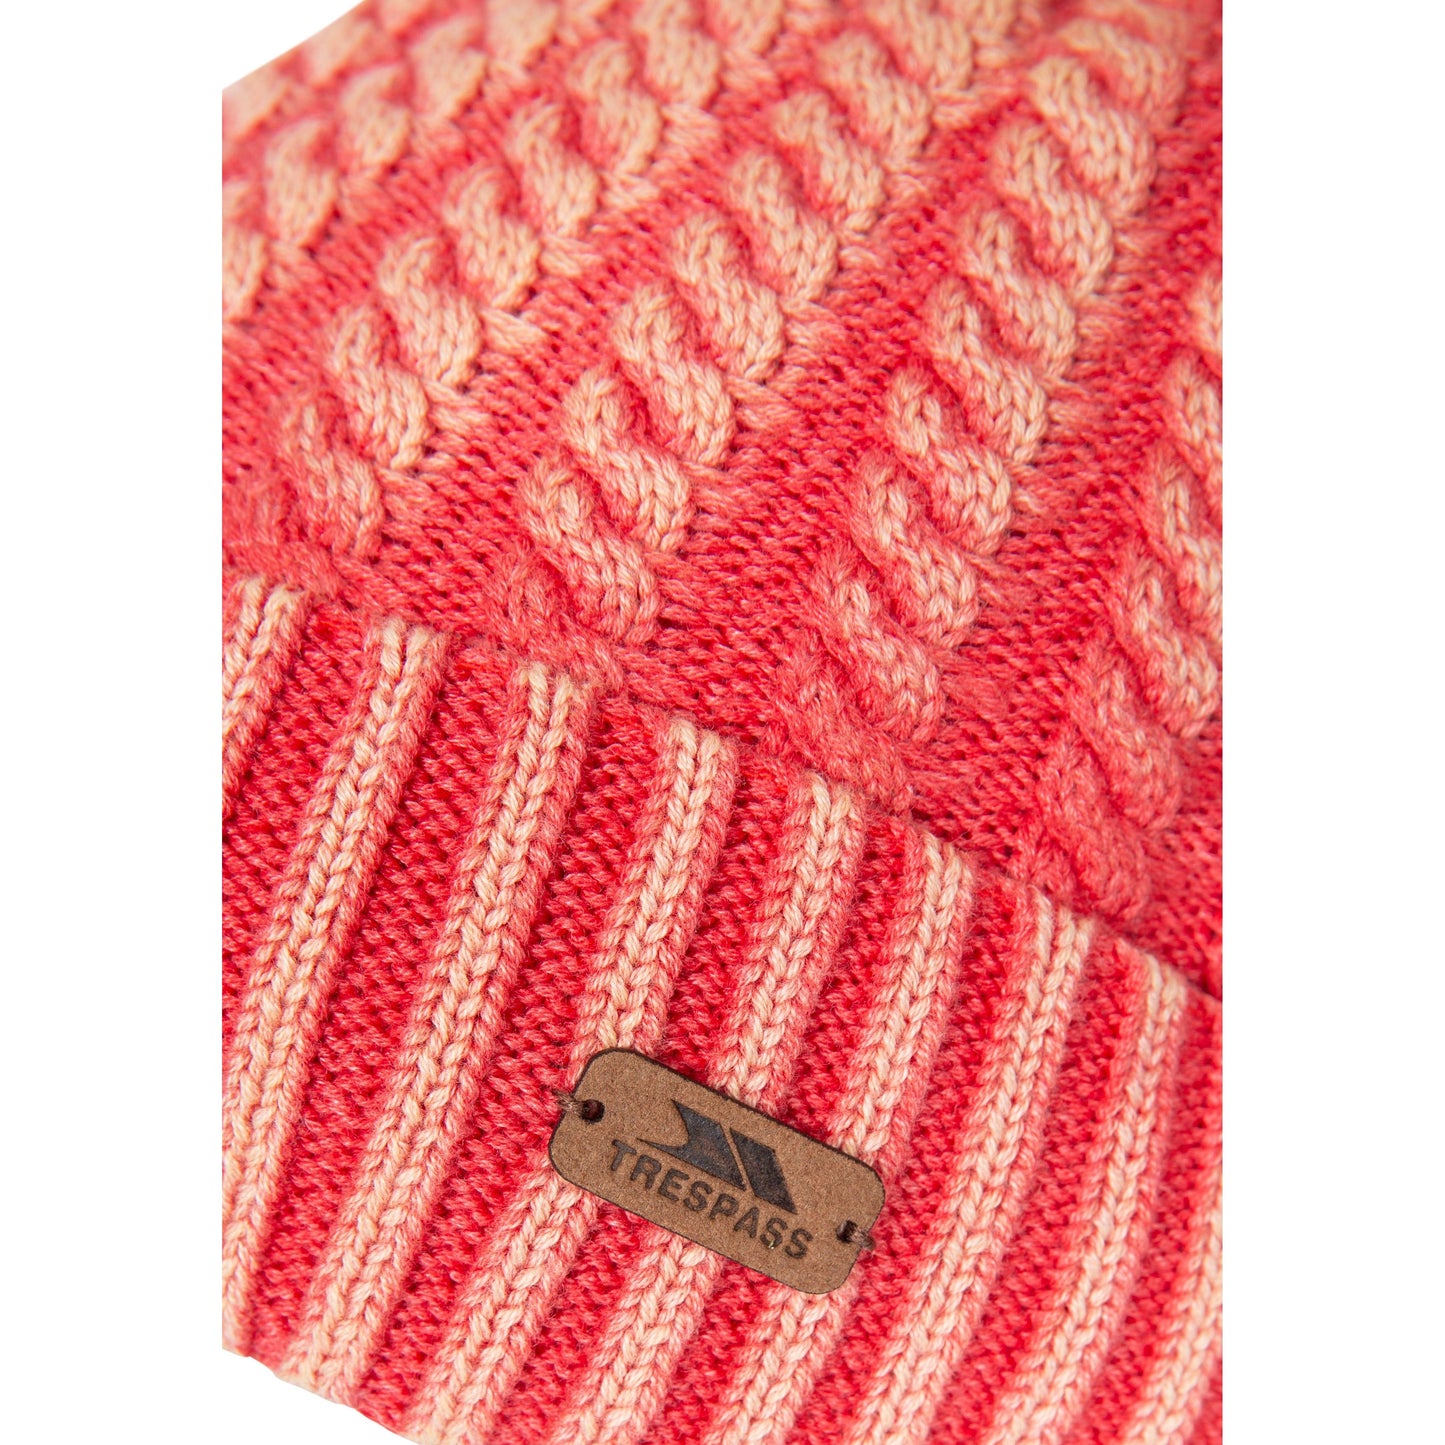 Faded Women's Knitted Hat - Hibiscus